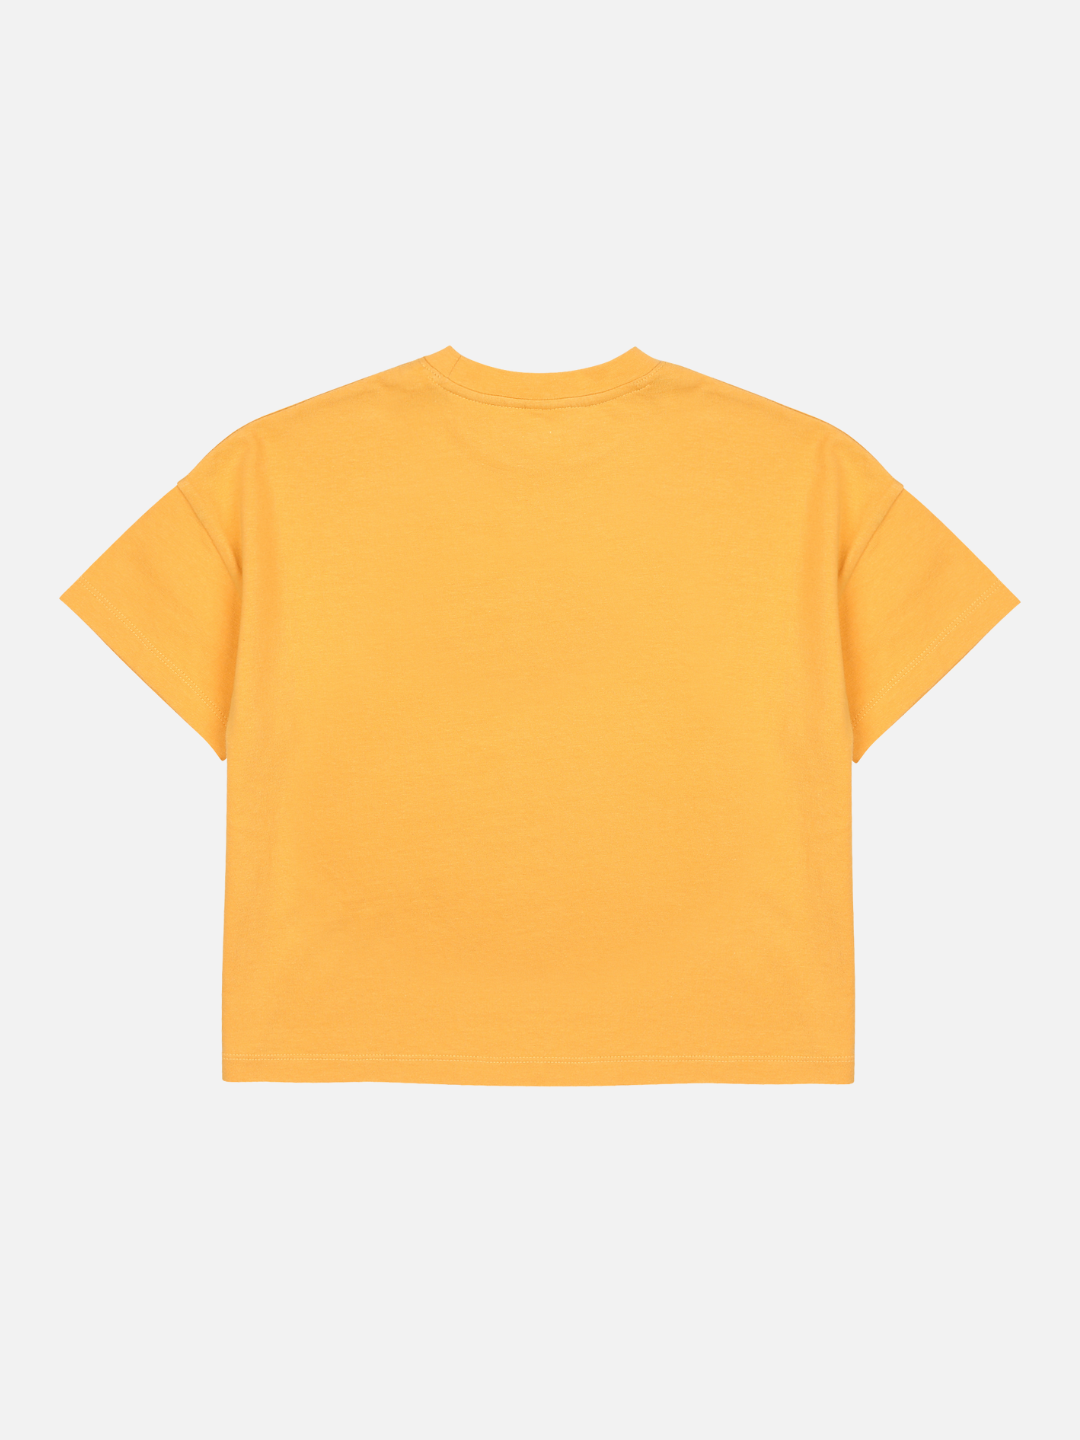 Back of T-shirt with no design on a yellow background.